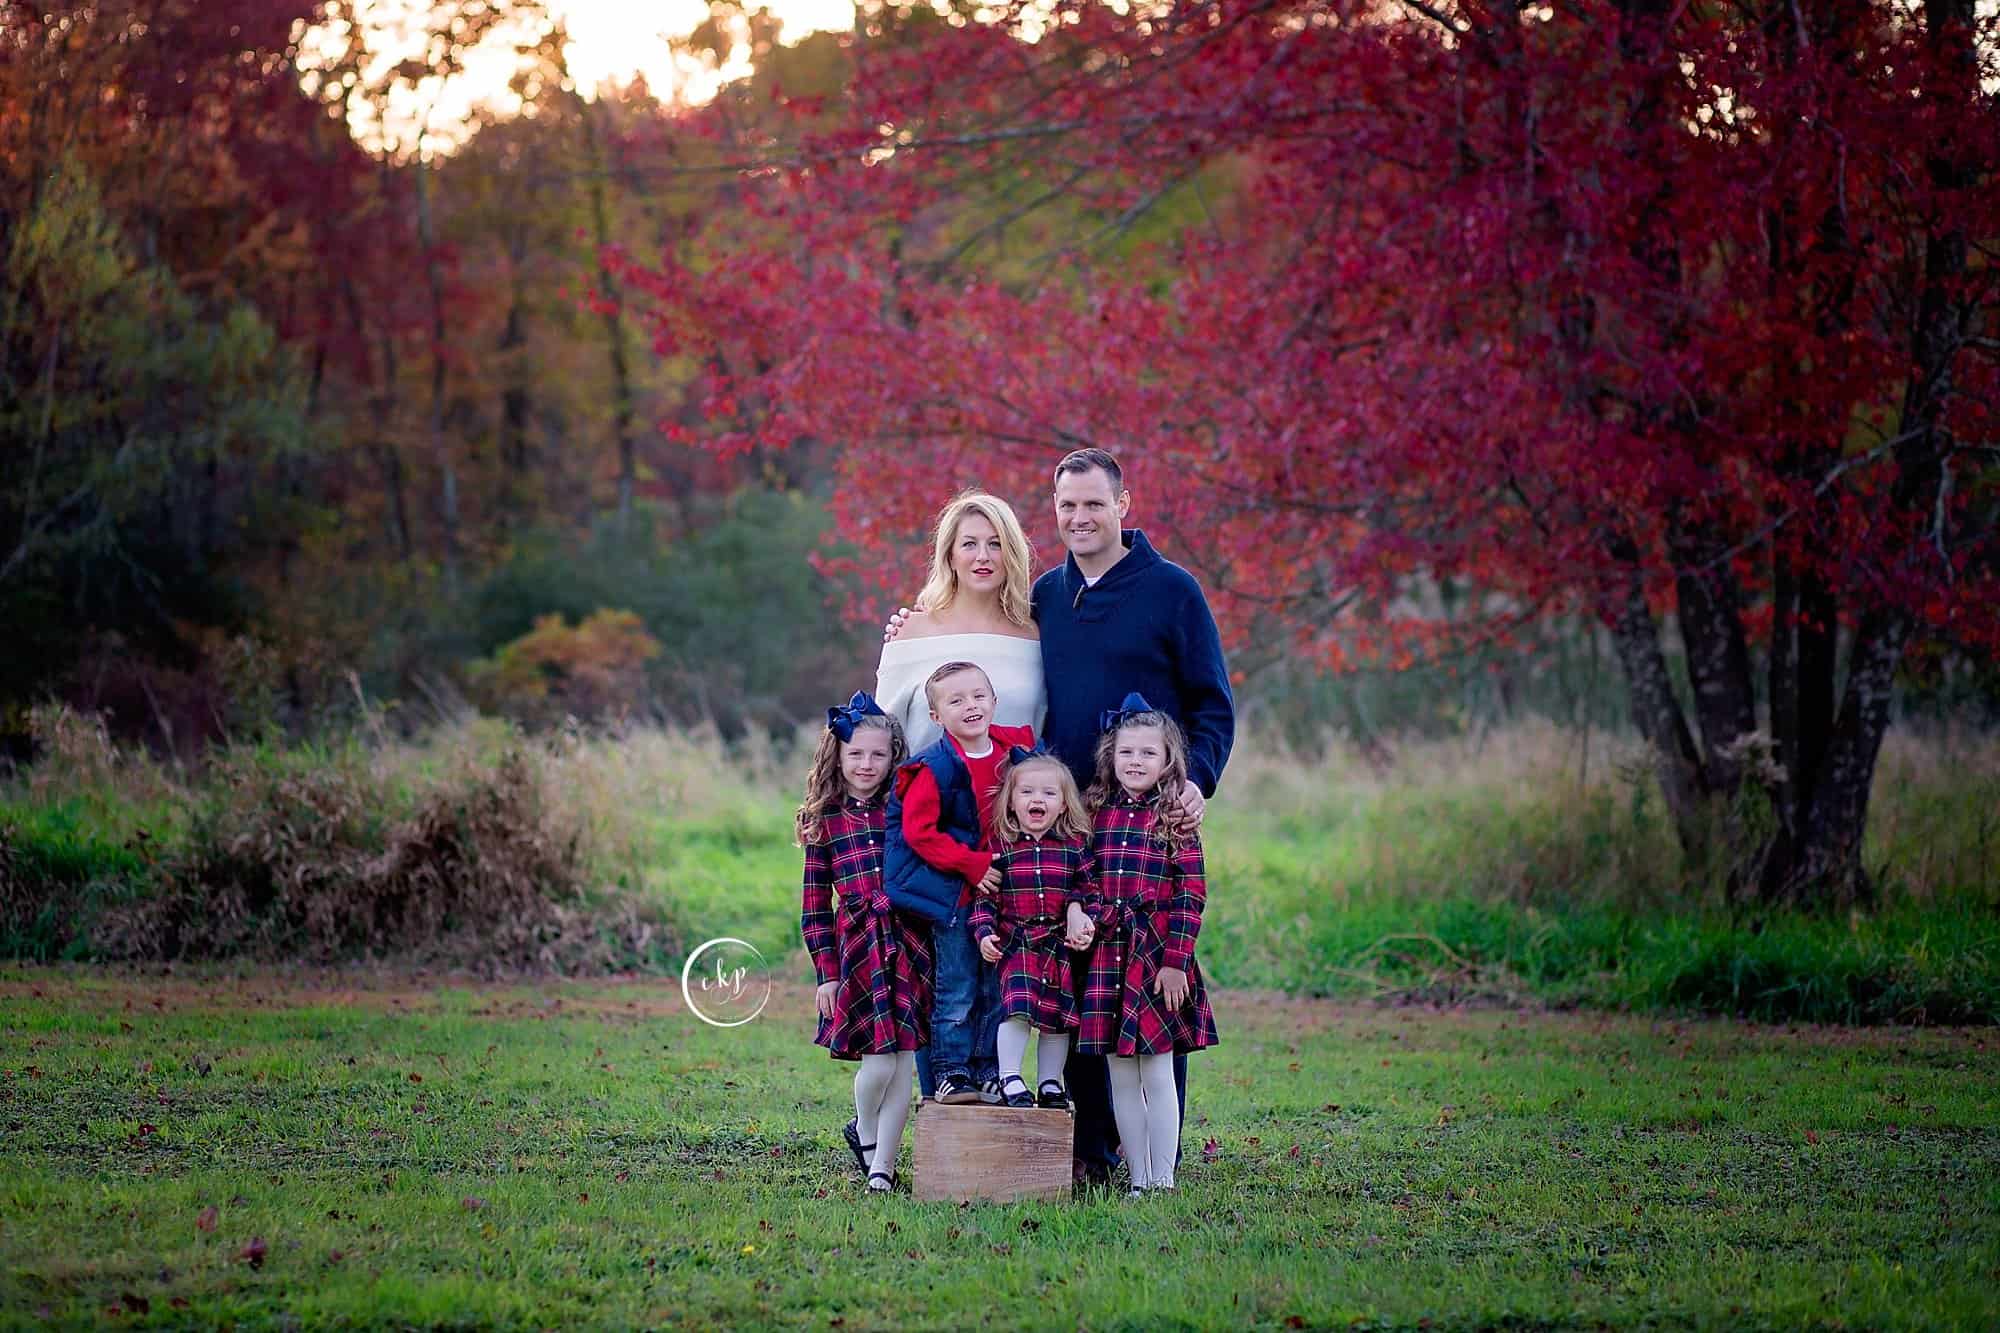 Fall family photography portraits in new england large family madison ct park foliage